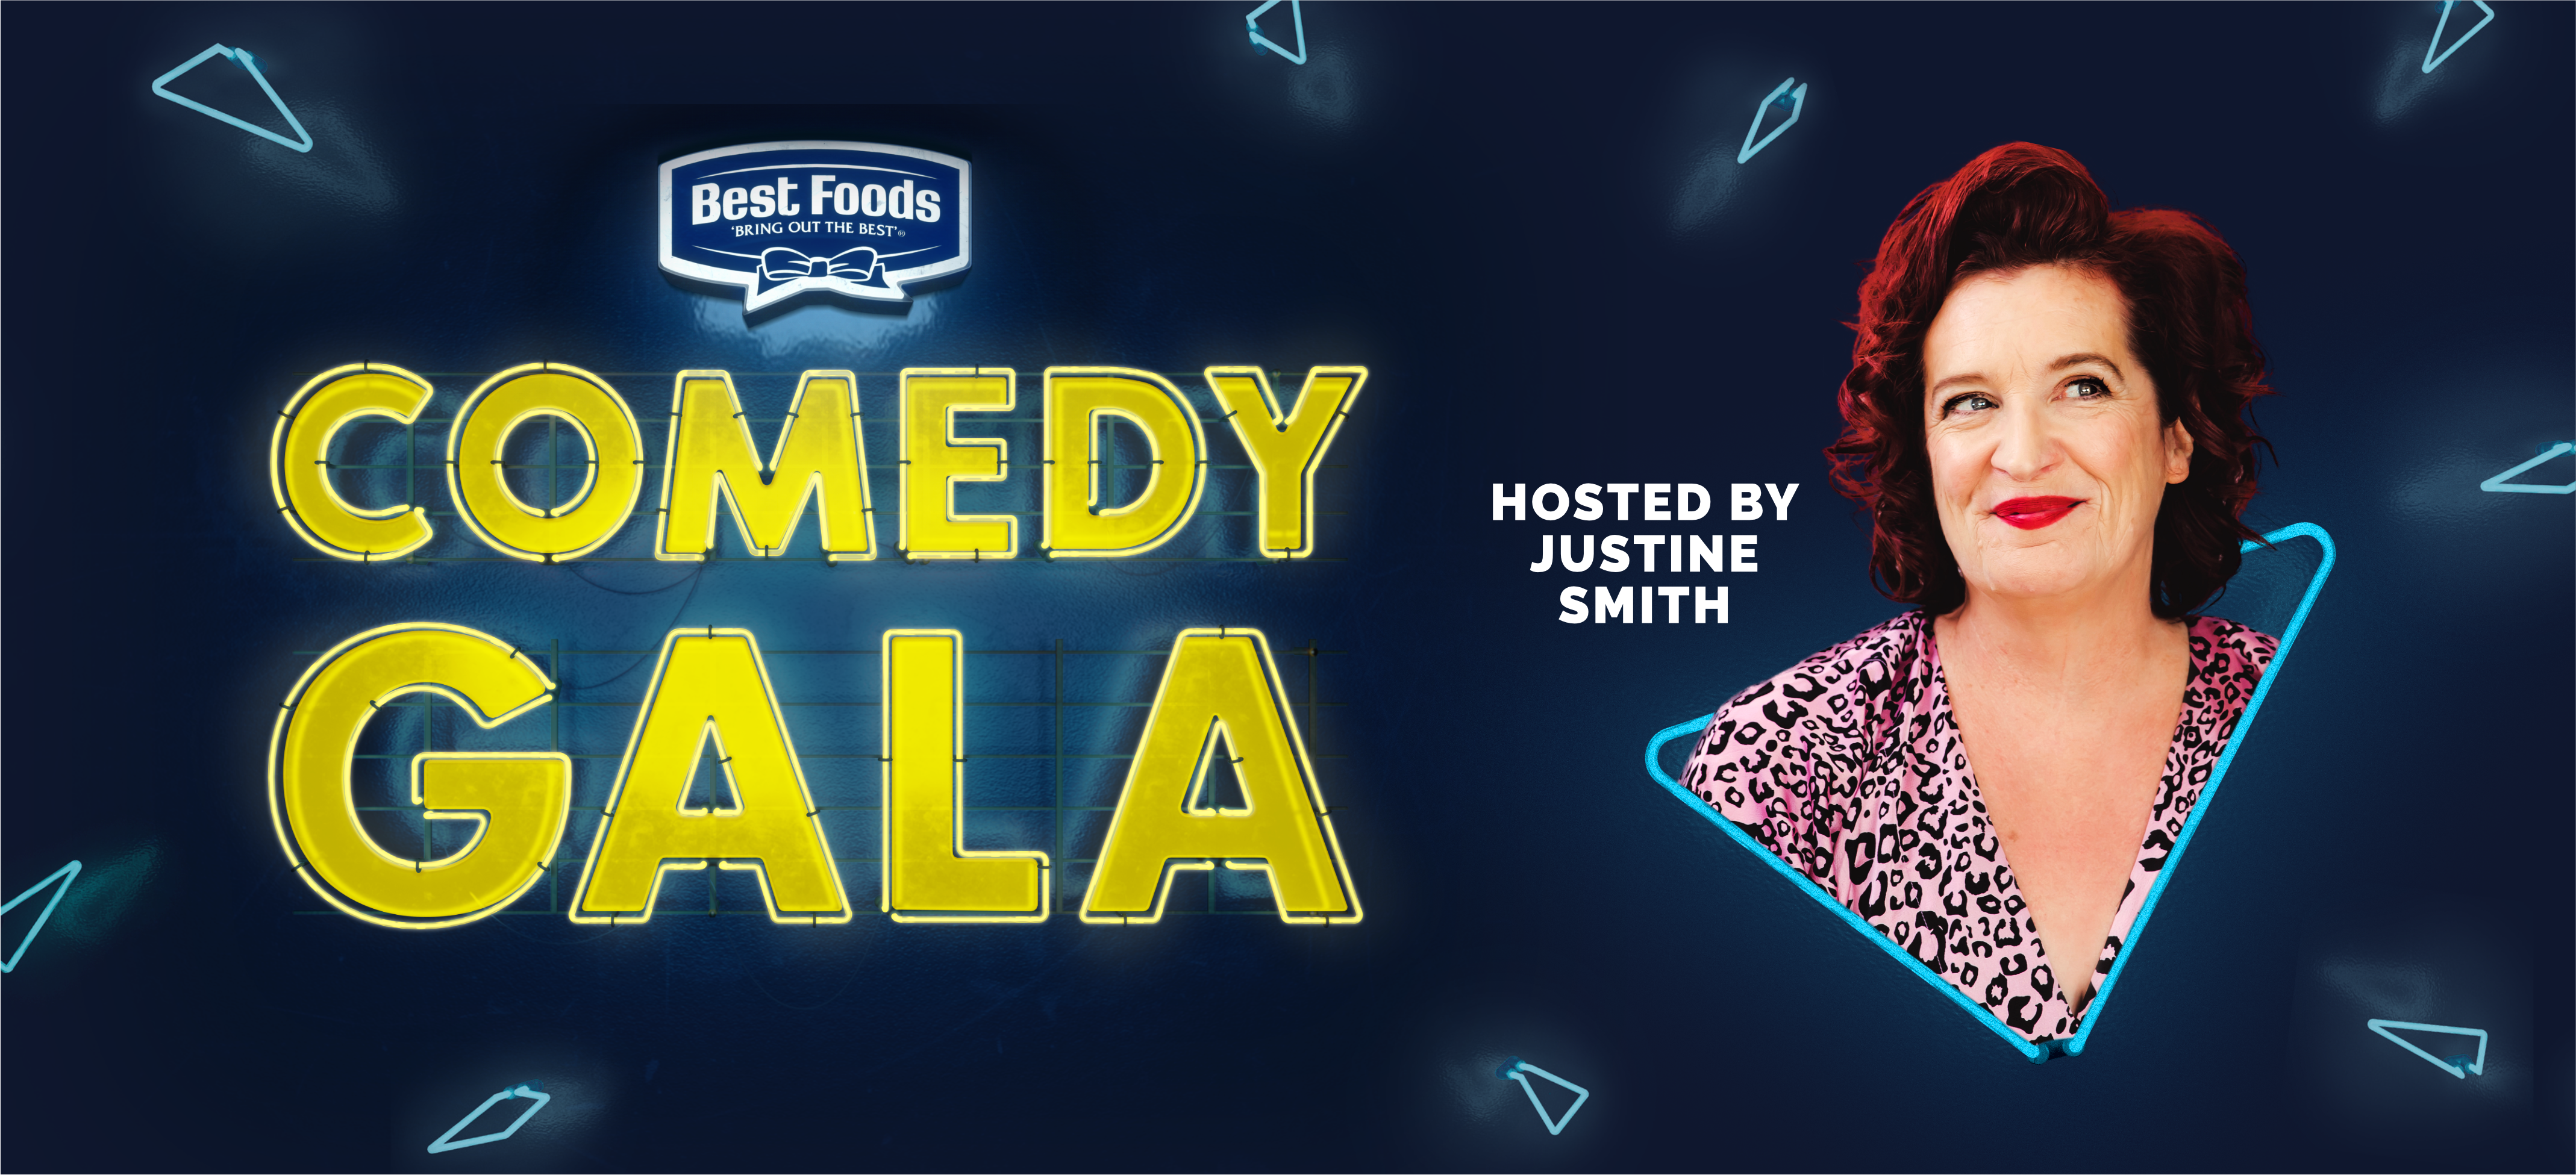 First Line Up Announced for Best Foods Comedy Gala 2021!